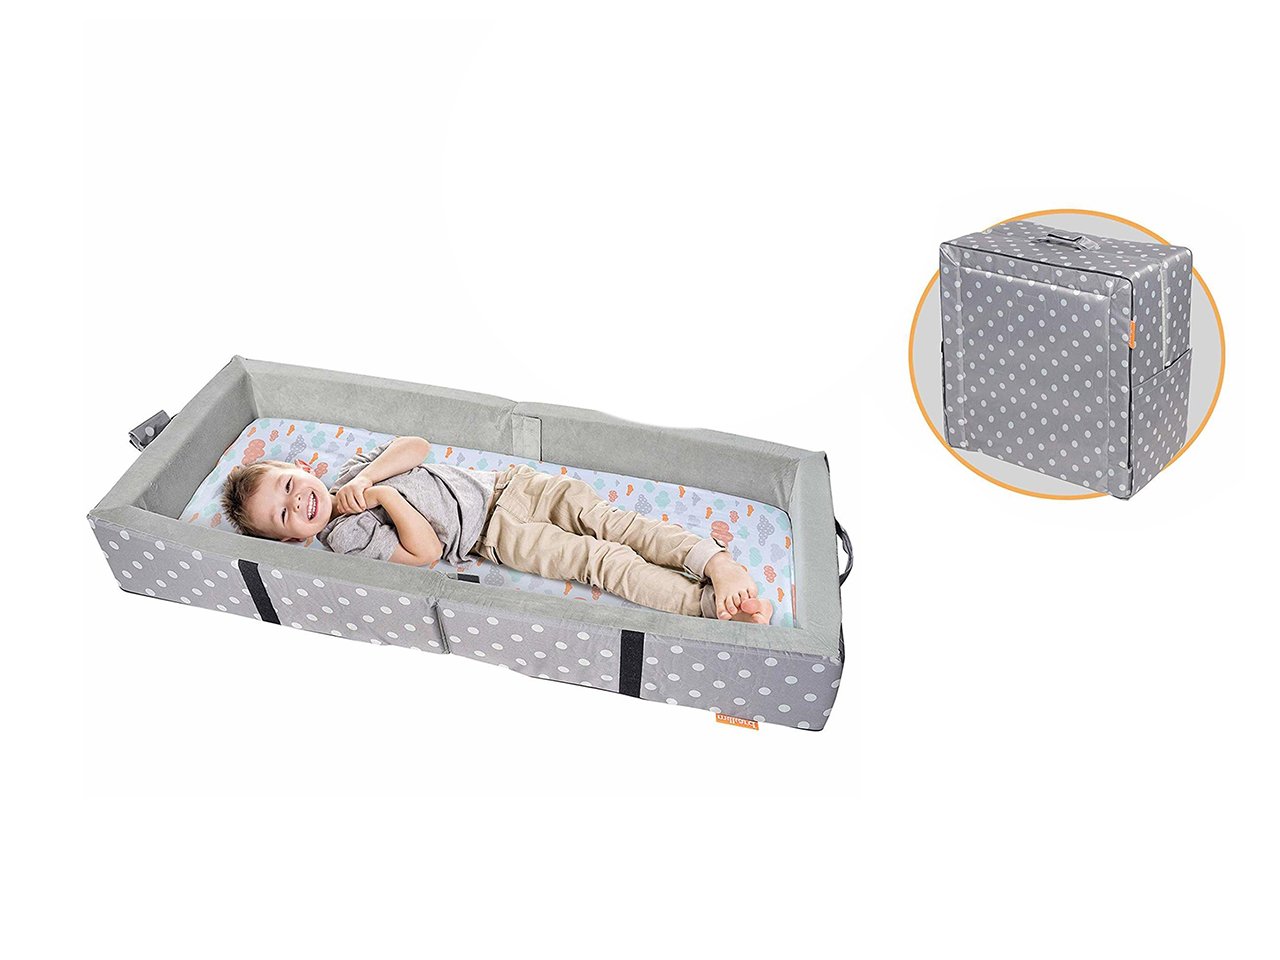 6 Best Toddler Travel Beds To Tote On, Tuckaire Twin Travel Bed